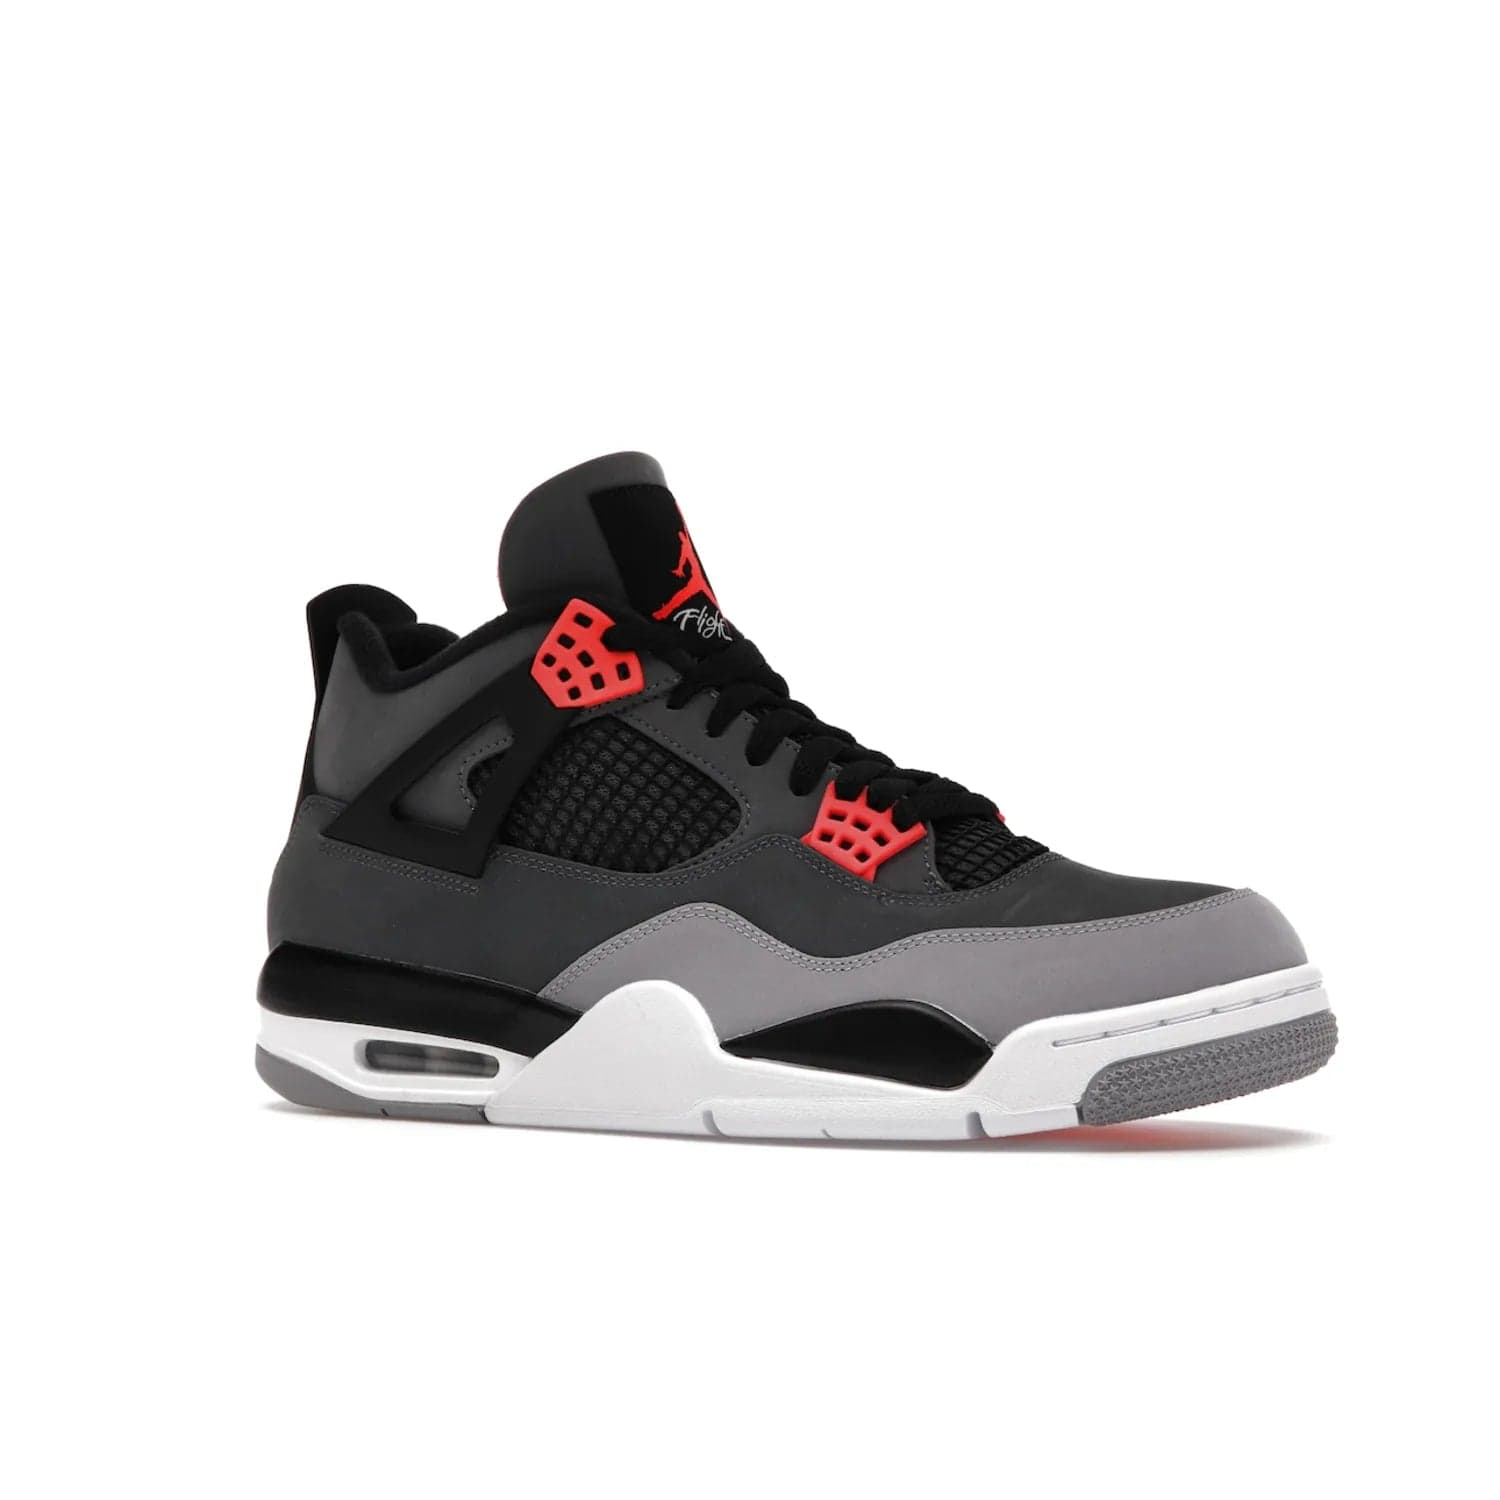 Jordan 4 Retro Infrared - Image 4 - Only at www.BallersClubKickz.com - Introducing the classic & timeless Air Jordan 4 Infrared. Durabuck upper, TPU mesh inserts, tech straps & heel tabs in dark grey and infrared accents. White sole with visible Air units. Out June 15, 2022. Get your pair now!